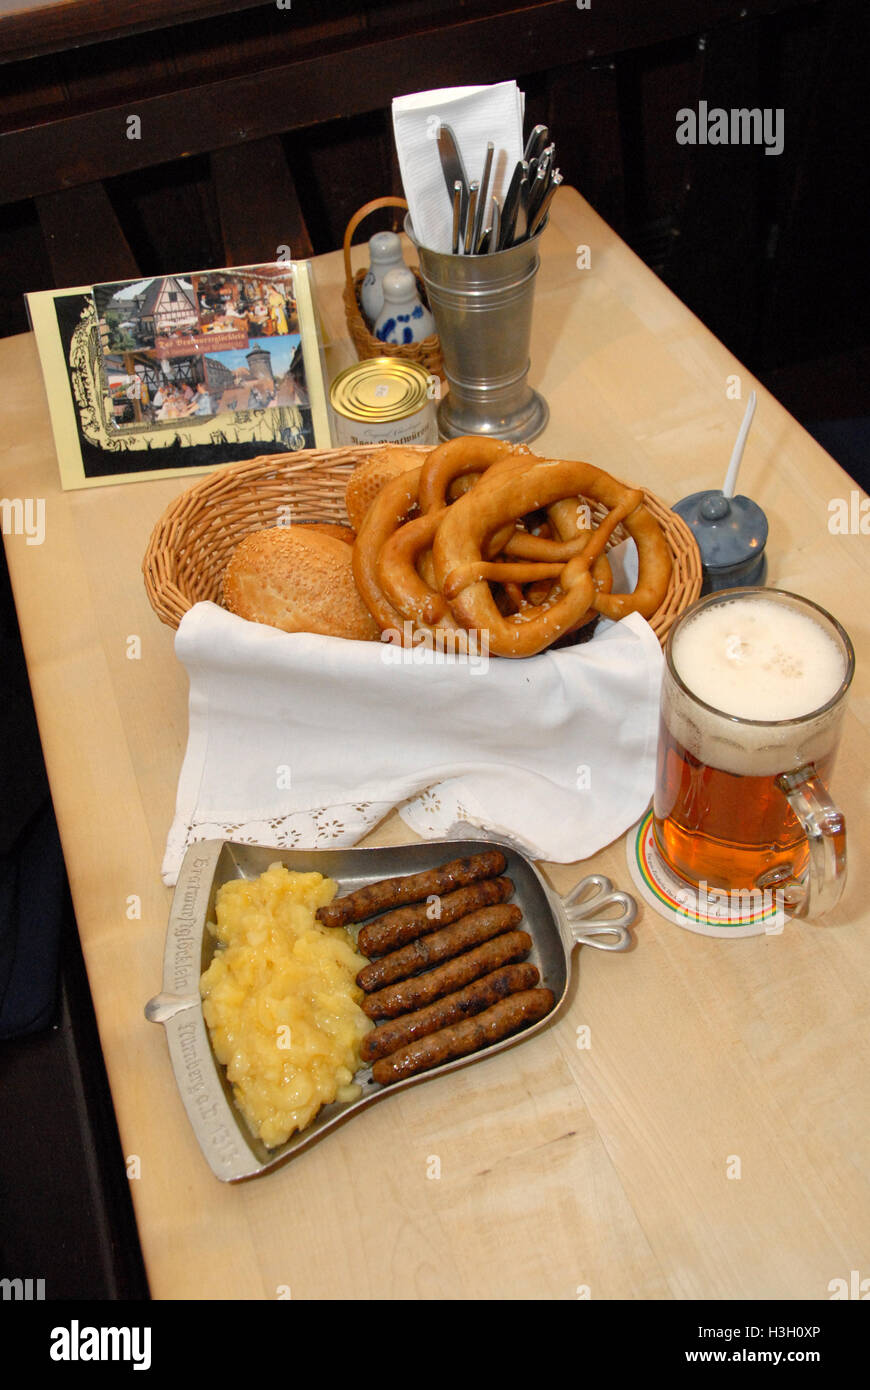 The famous finger-thin Nuremberg Bratwurst (Nuremberg sausage) accompanied with German bread, potato salad on a pewter plate and a half-litre glass of Stock Photo